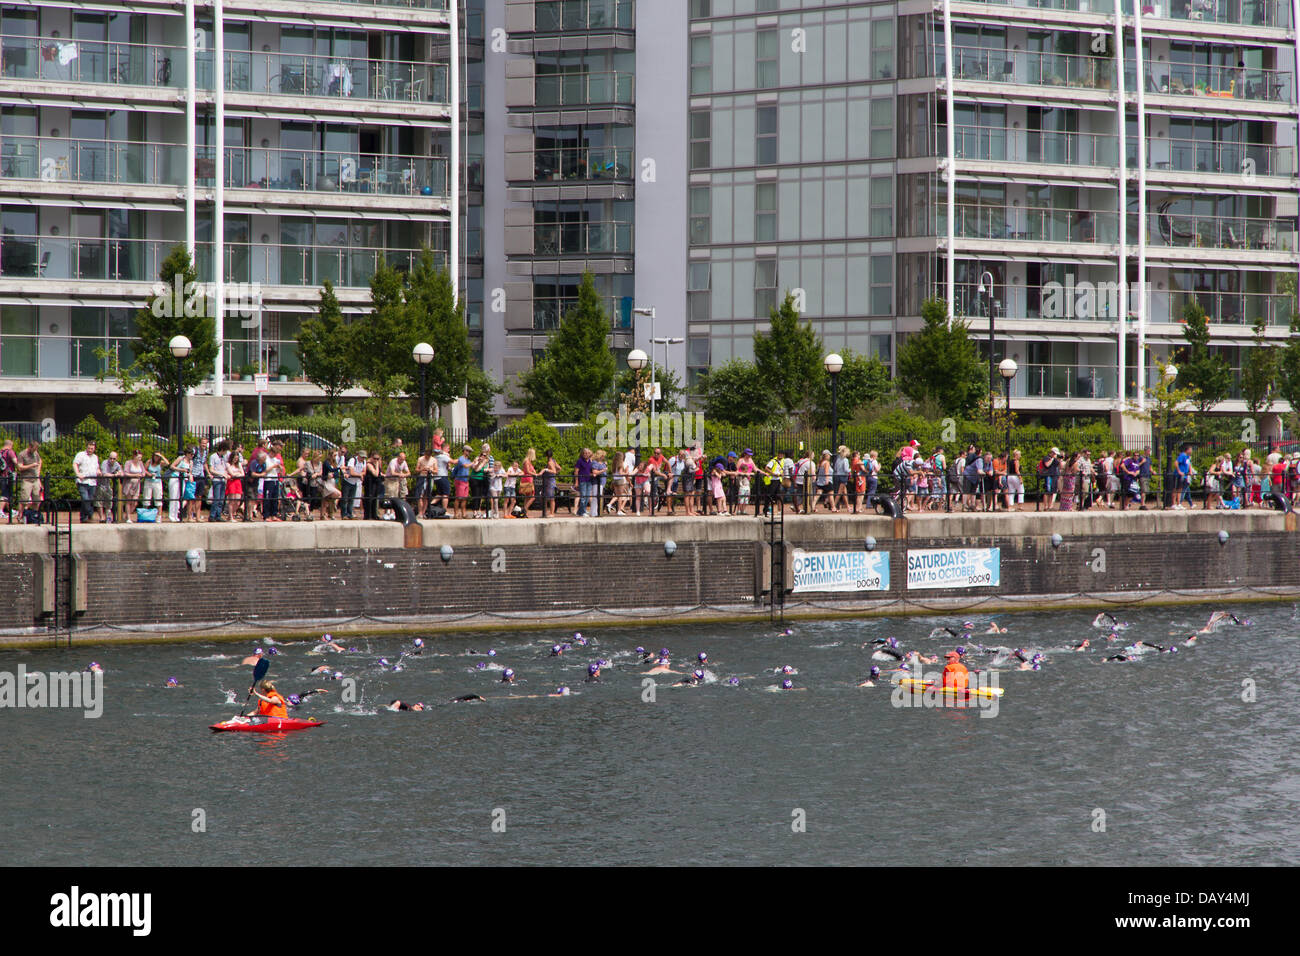 MediaCity, Salford Quays, Manchester, England. 20th July 2013. The annual Great Manchester Swim takes place in Salford Quays. © Stock Photo